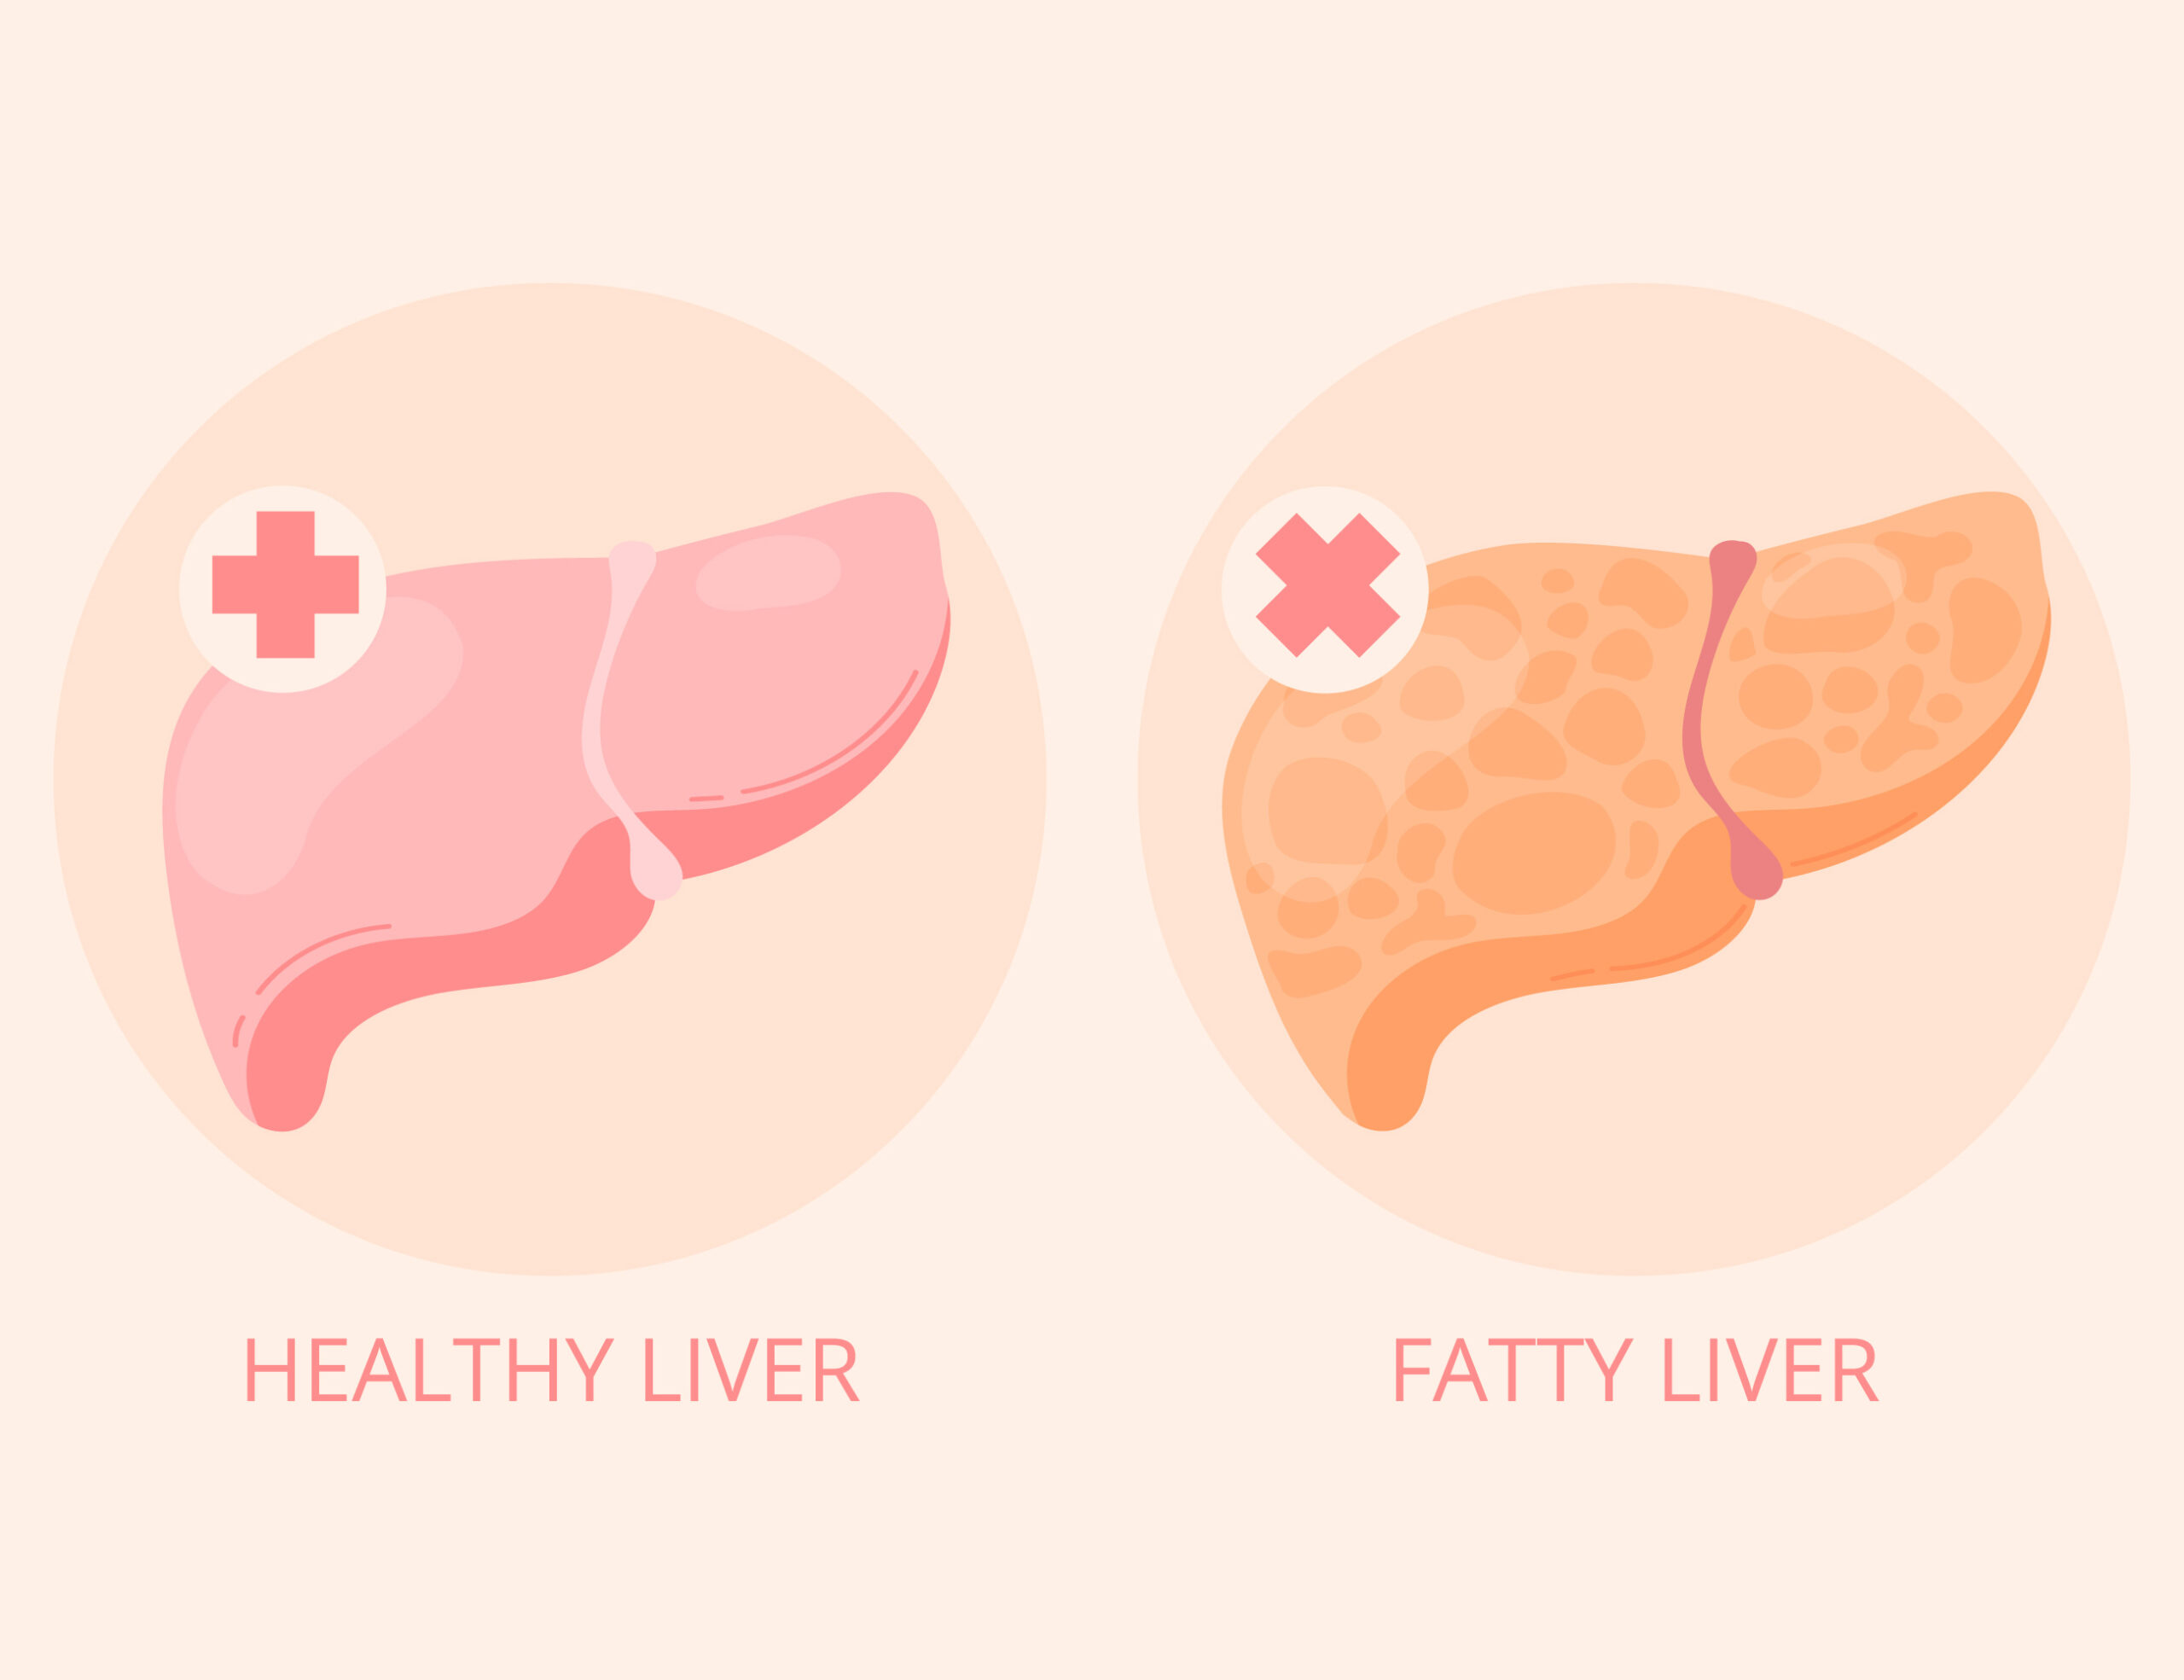 How To Reverse Fatty Liver? 13 Top Lifestyle Changes To Make Today